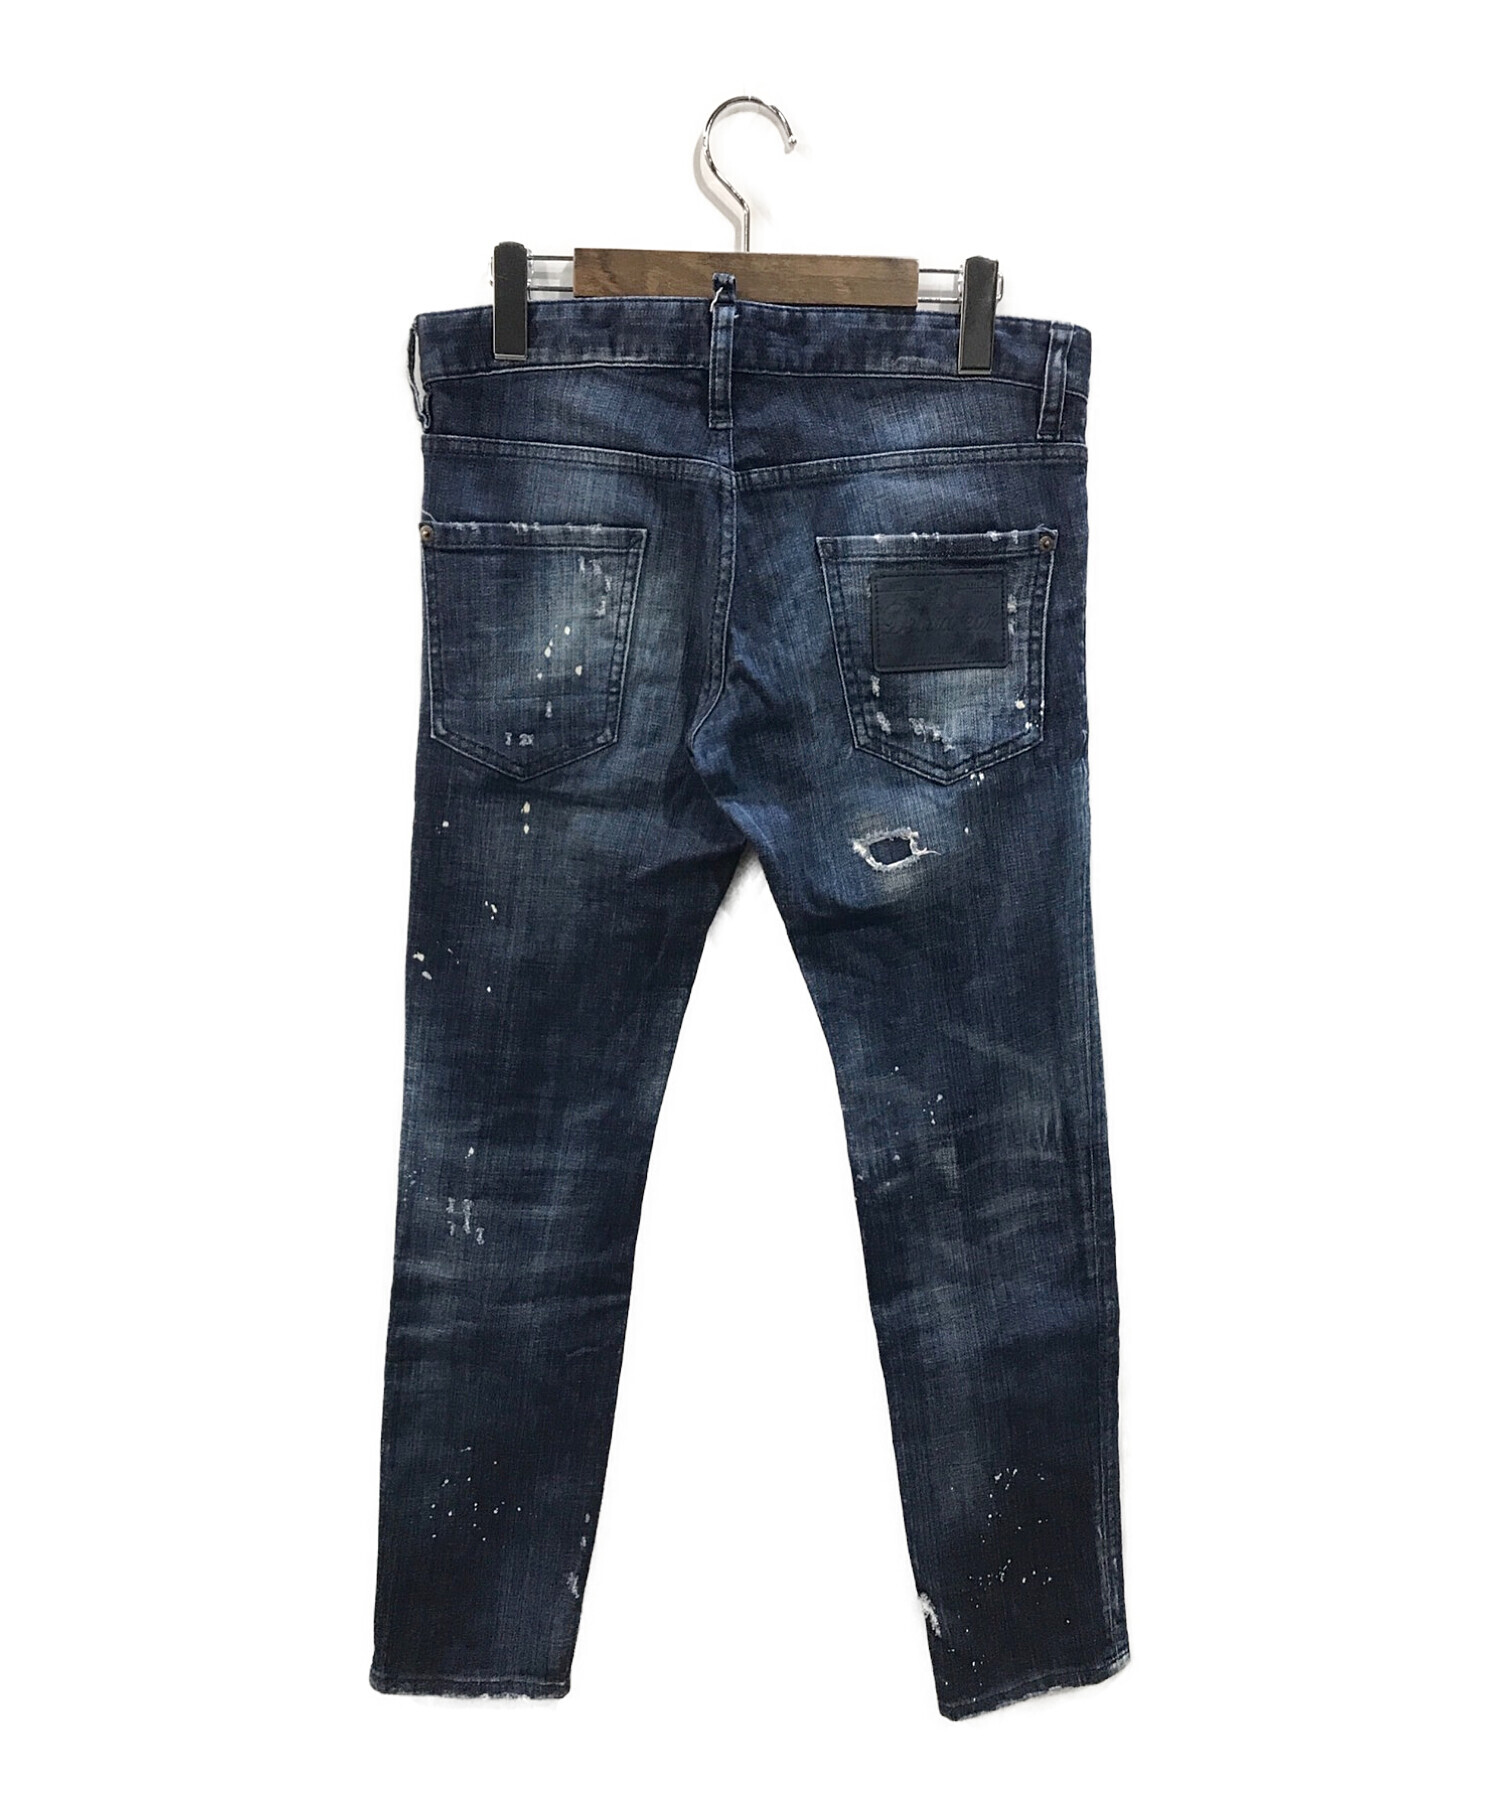 DSQUARED clement jean ジーンズ size44